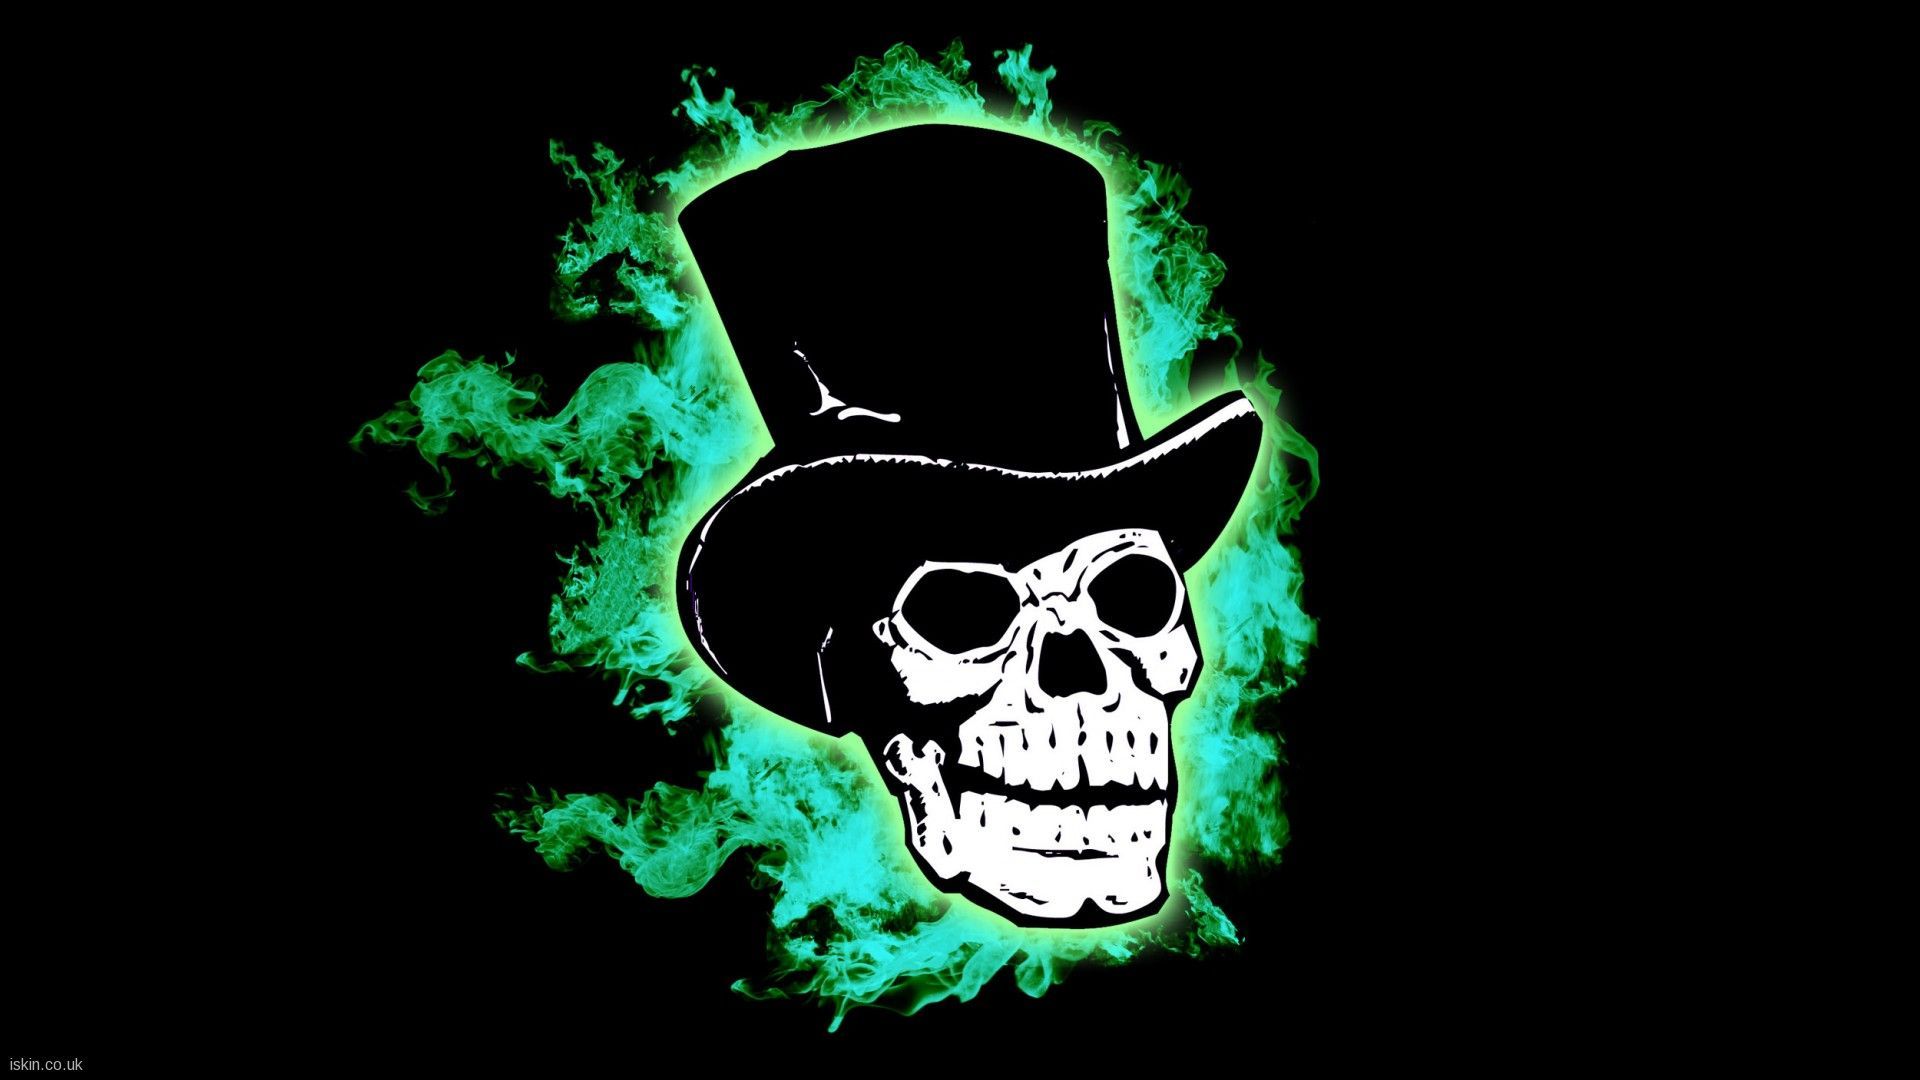 Free Skull Wallpapers | Wallpapers, Backgrounds, Images, Art Photos.